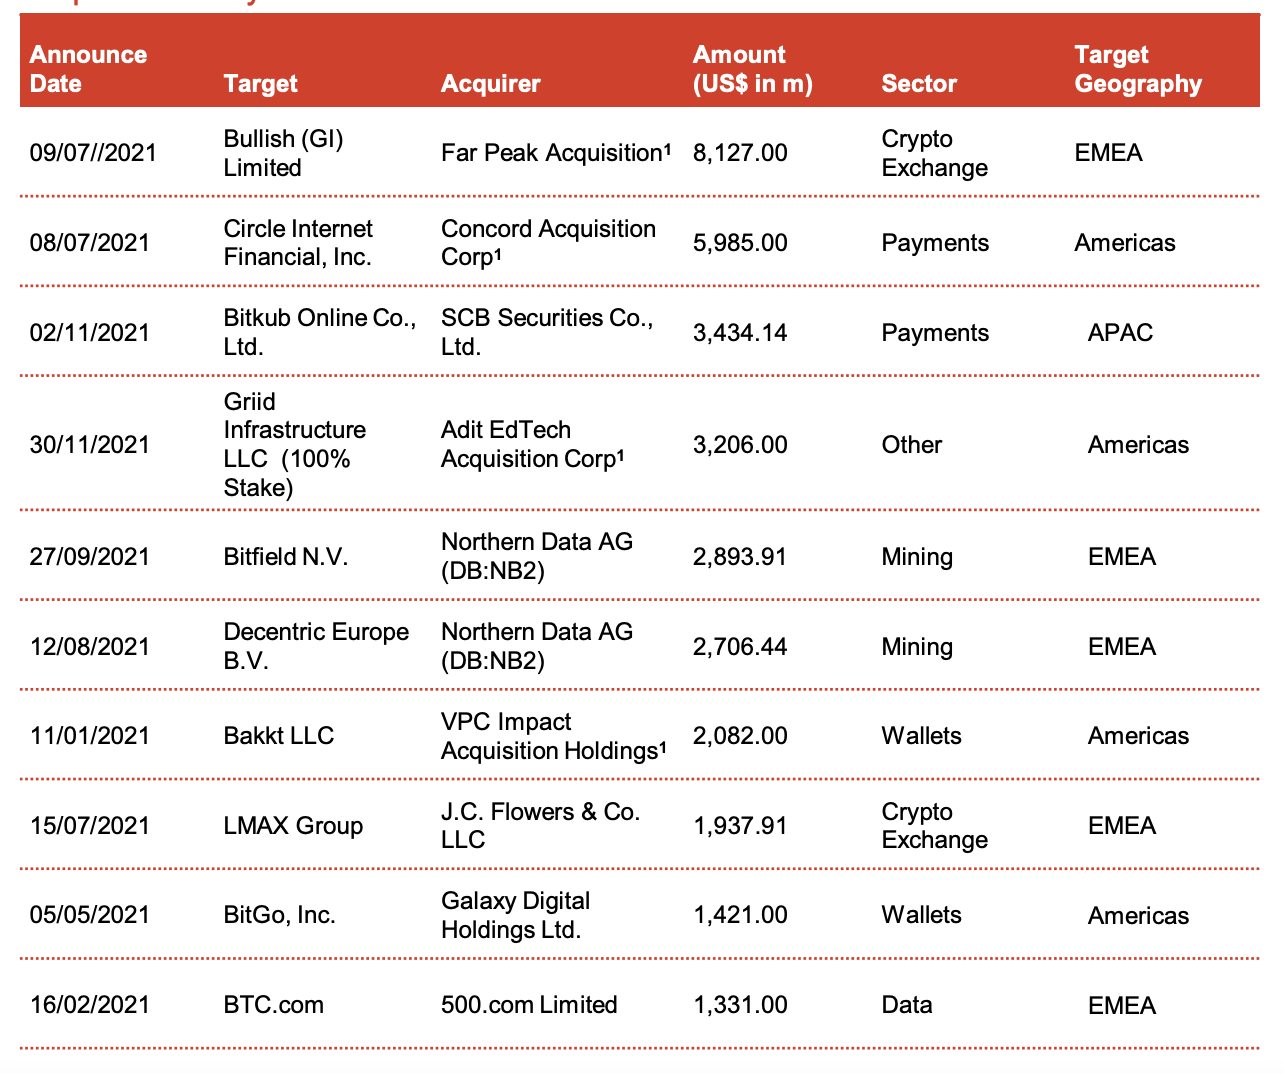 Top 10 crypto M&A deals in 2021 by deal size